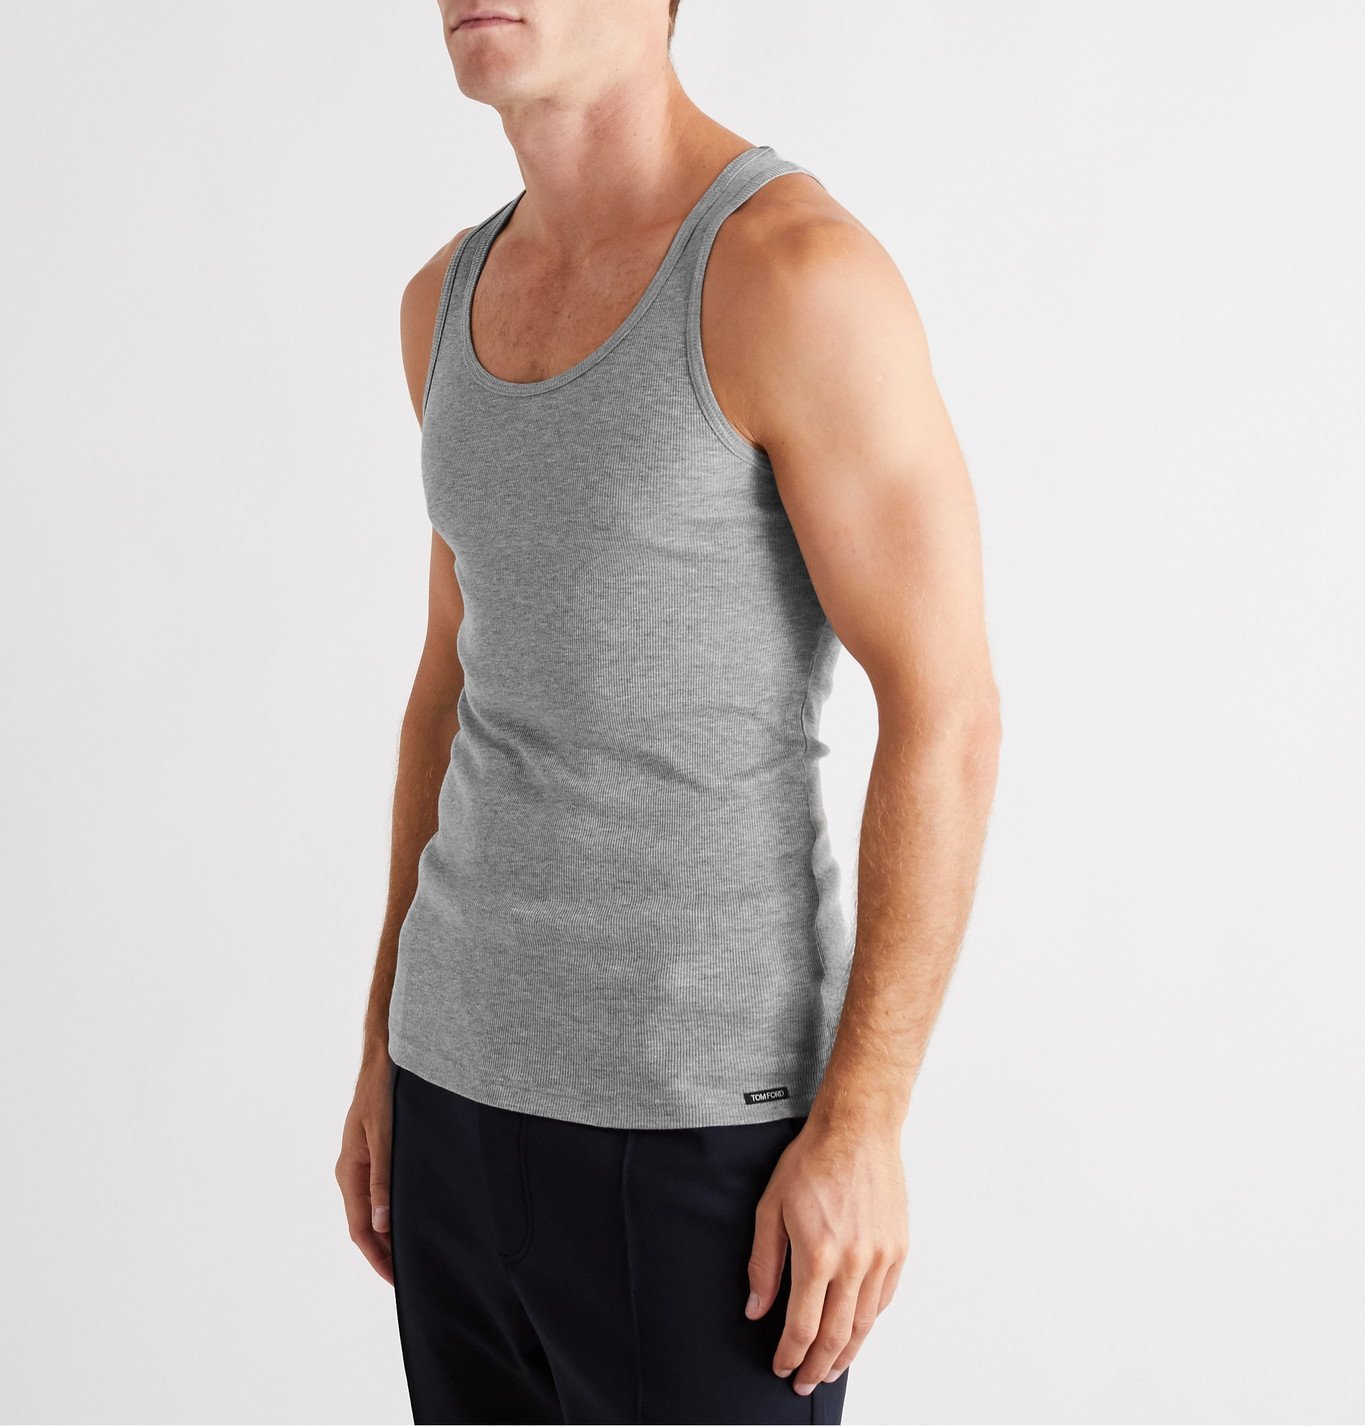 TOM FORD - Ribbed Mélange Cotton and Modal-Blend Tank Top - Gray TOM FORD